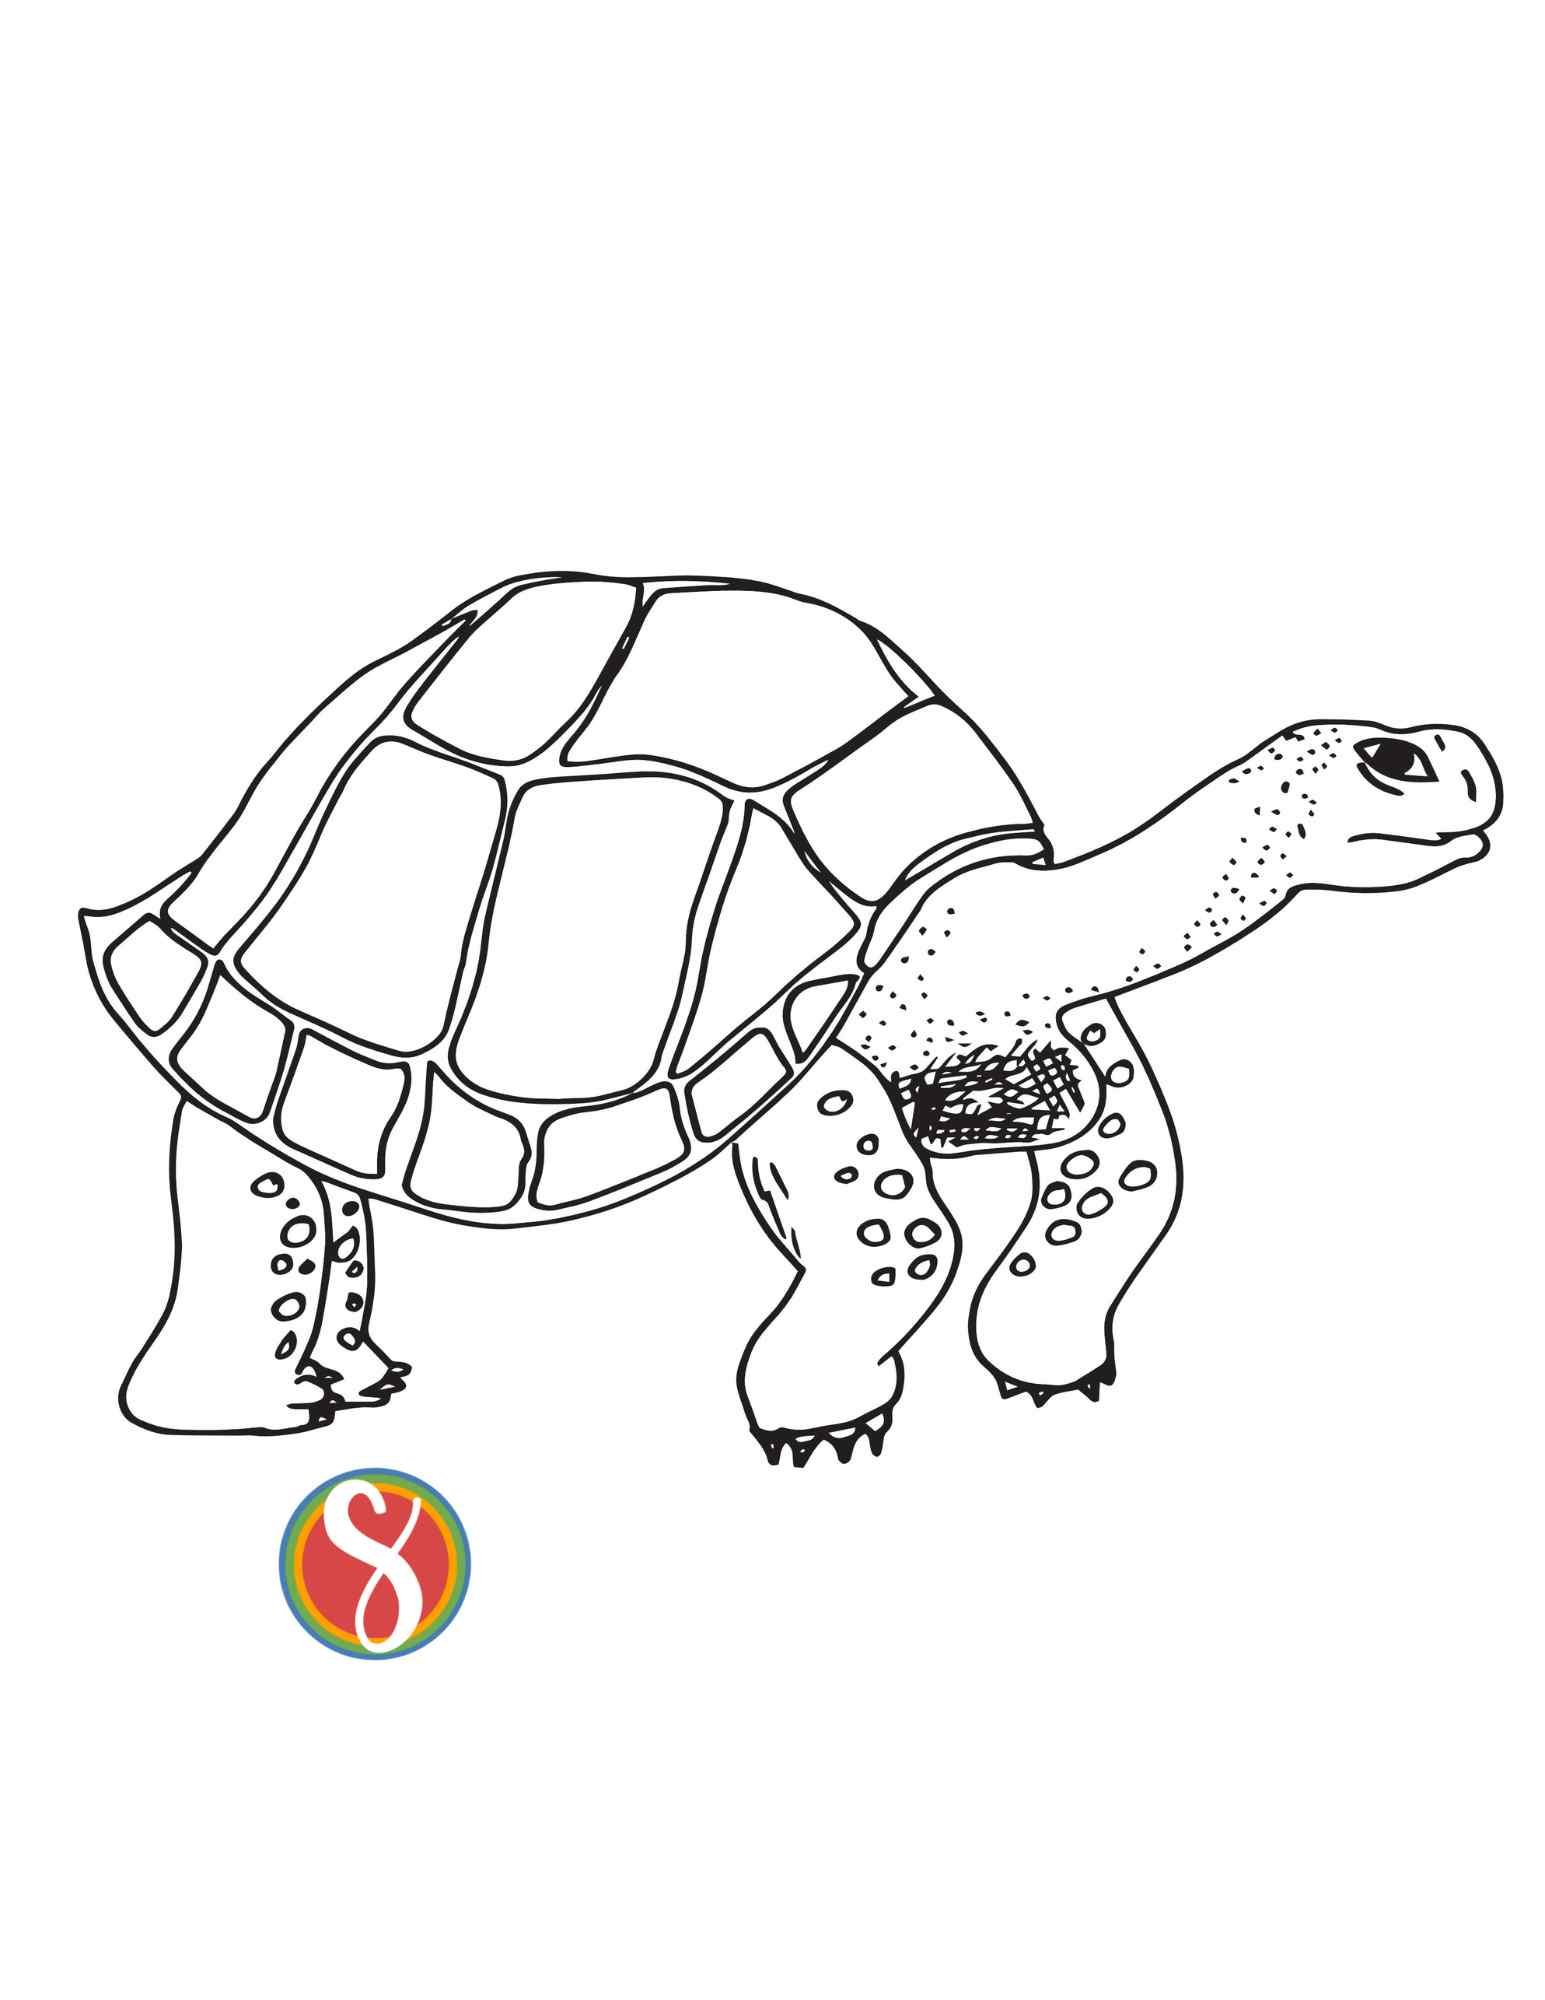 A tall tortoise drawing is on this coloring page, an outline of the tortoise with little details to fill in with your own color